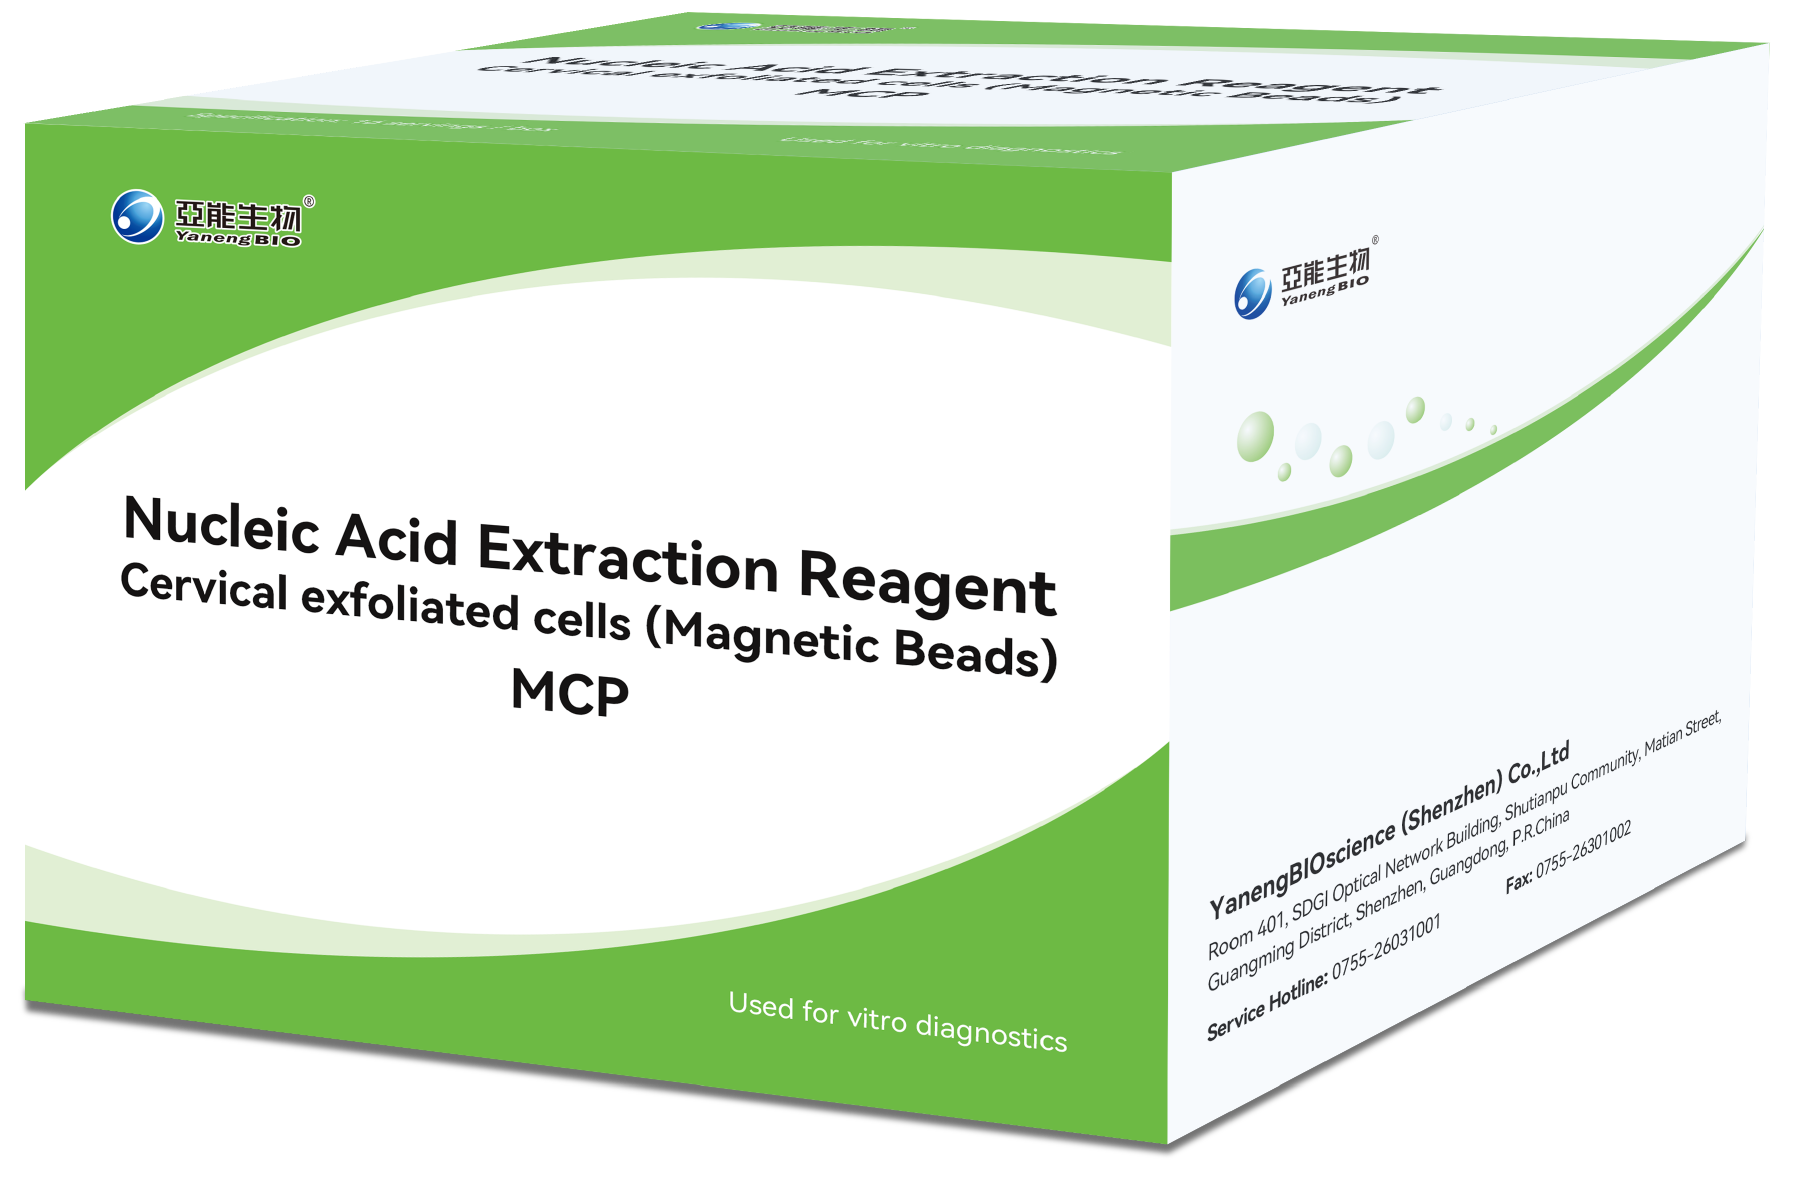 Nucleic Acid Extraction Reagent -- MCP